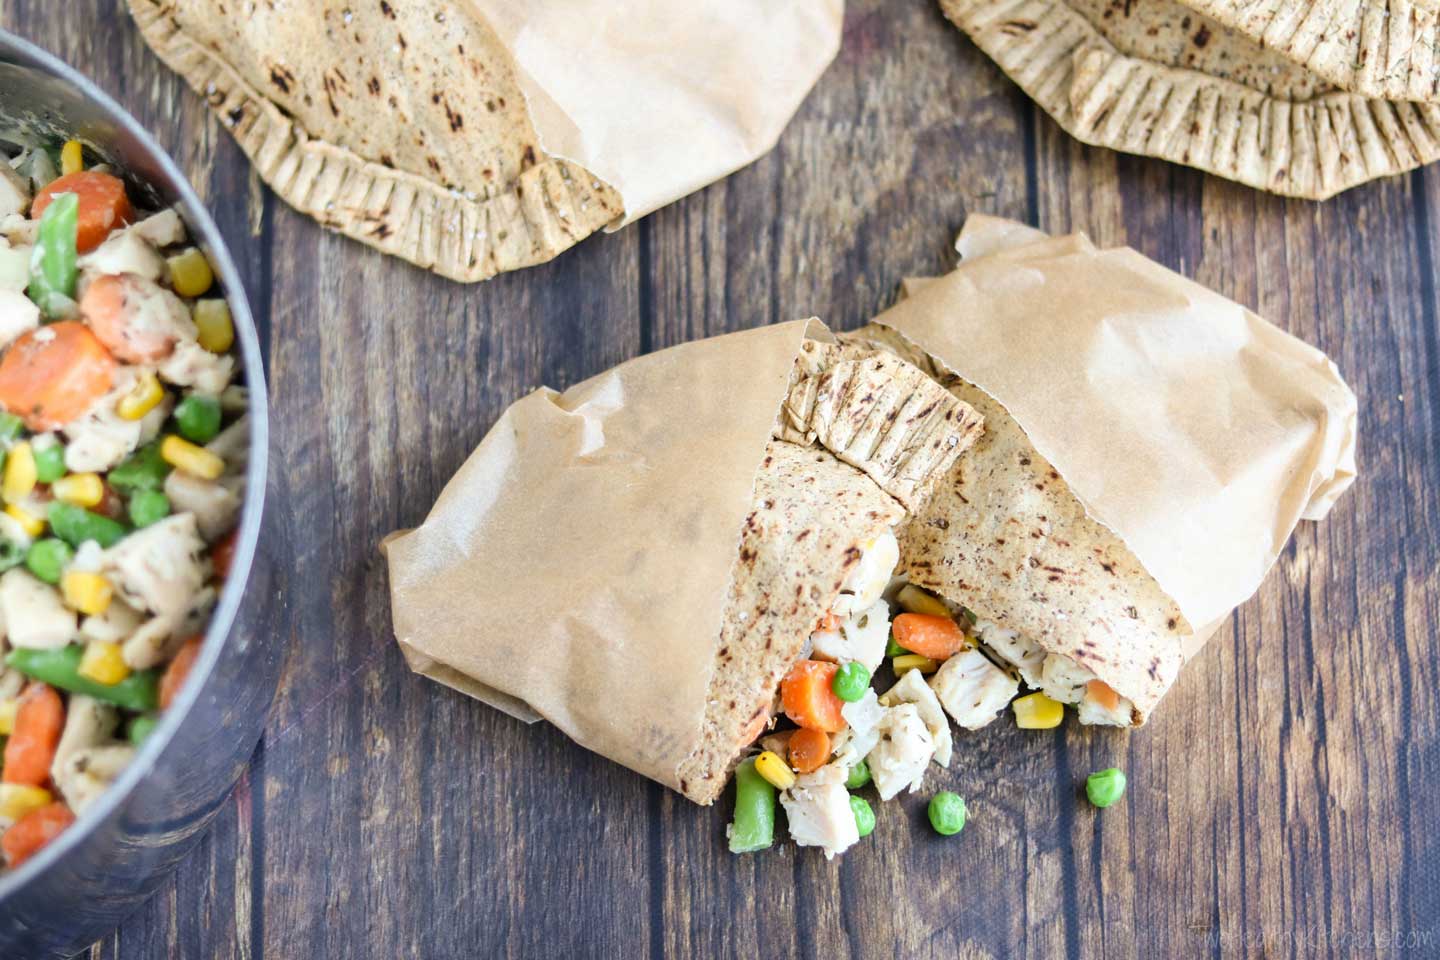 Hand pies make great grab-and-go meals! And our healthy Chicken Pot Pie Hand Pies are no exception! Loaded with tender white-meat chicken and lots of yummy veggies, plus lots of fiber and very little fat! This is an easy chicken pot pie recipe for all those busy nights!